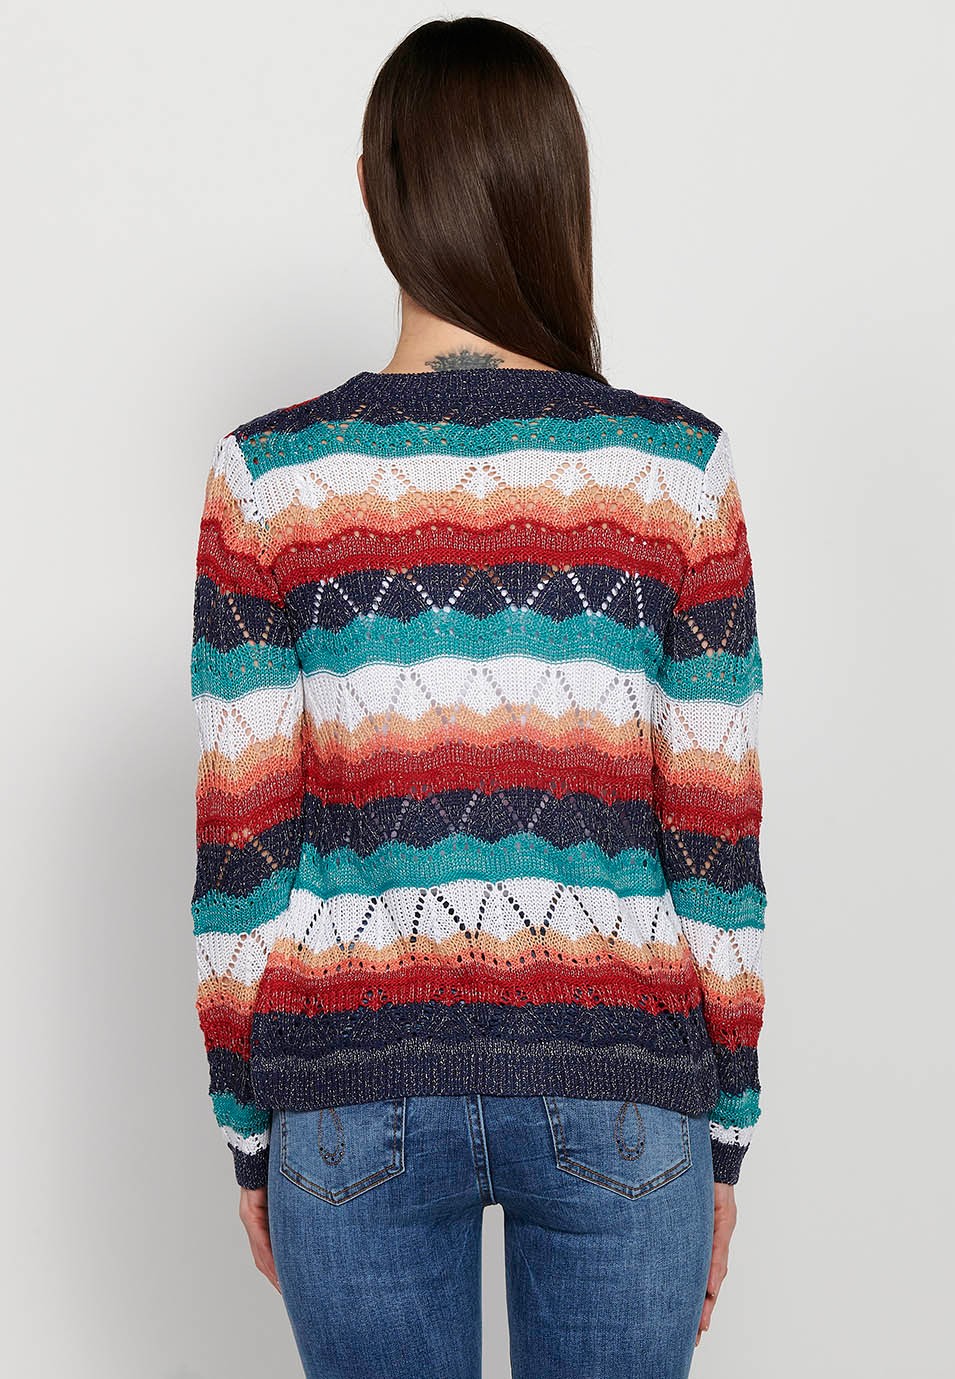 Long-sleeved openwork tricot, multicolored stripes for women